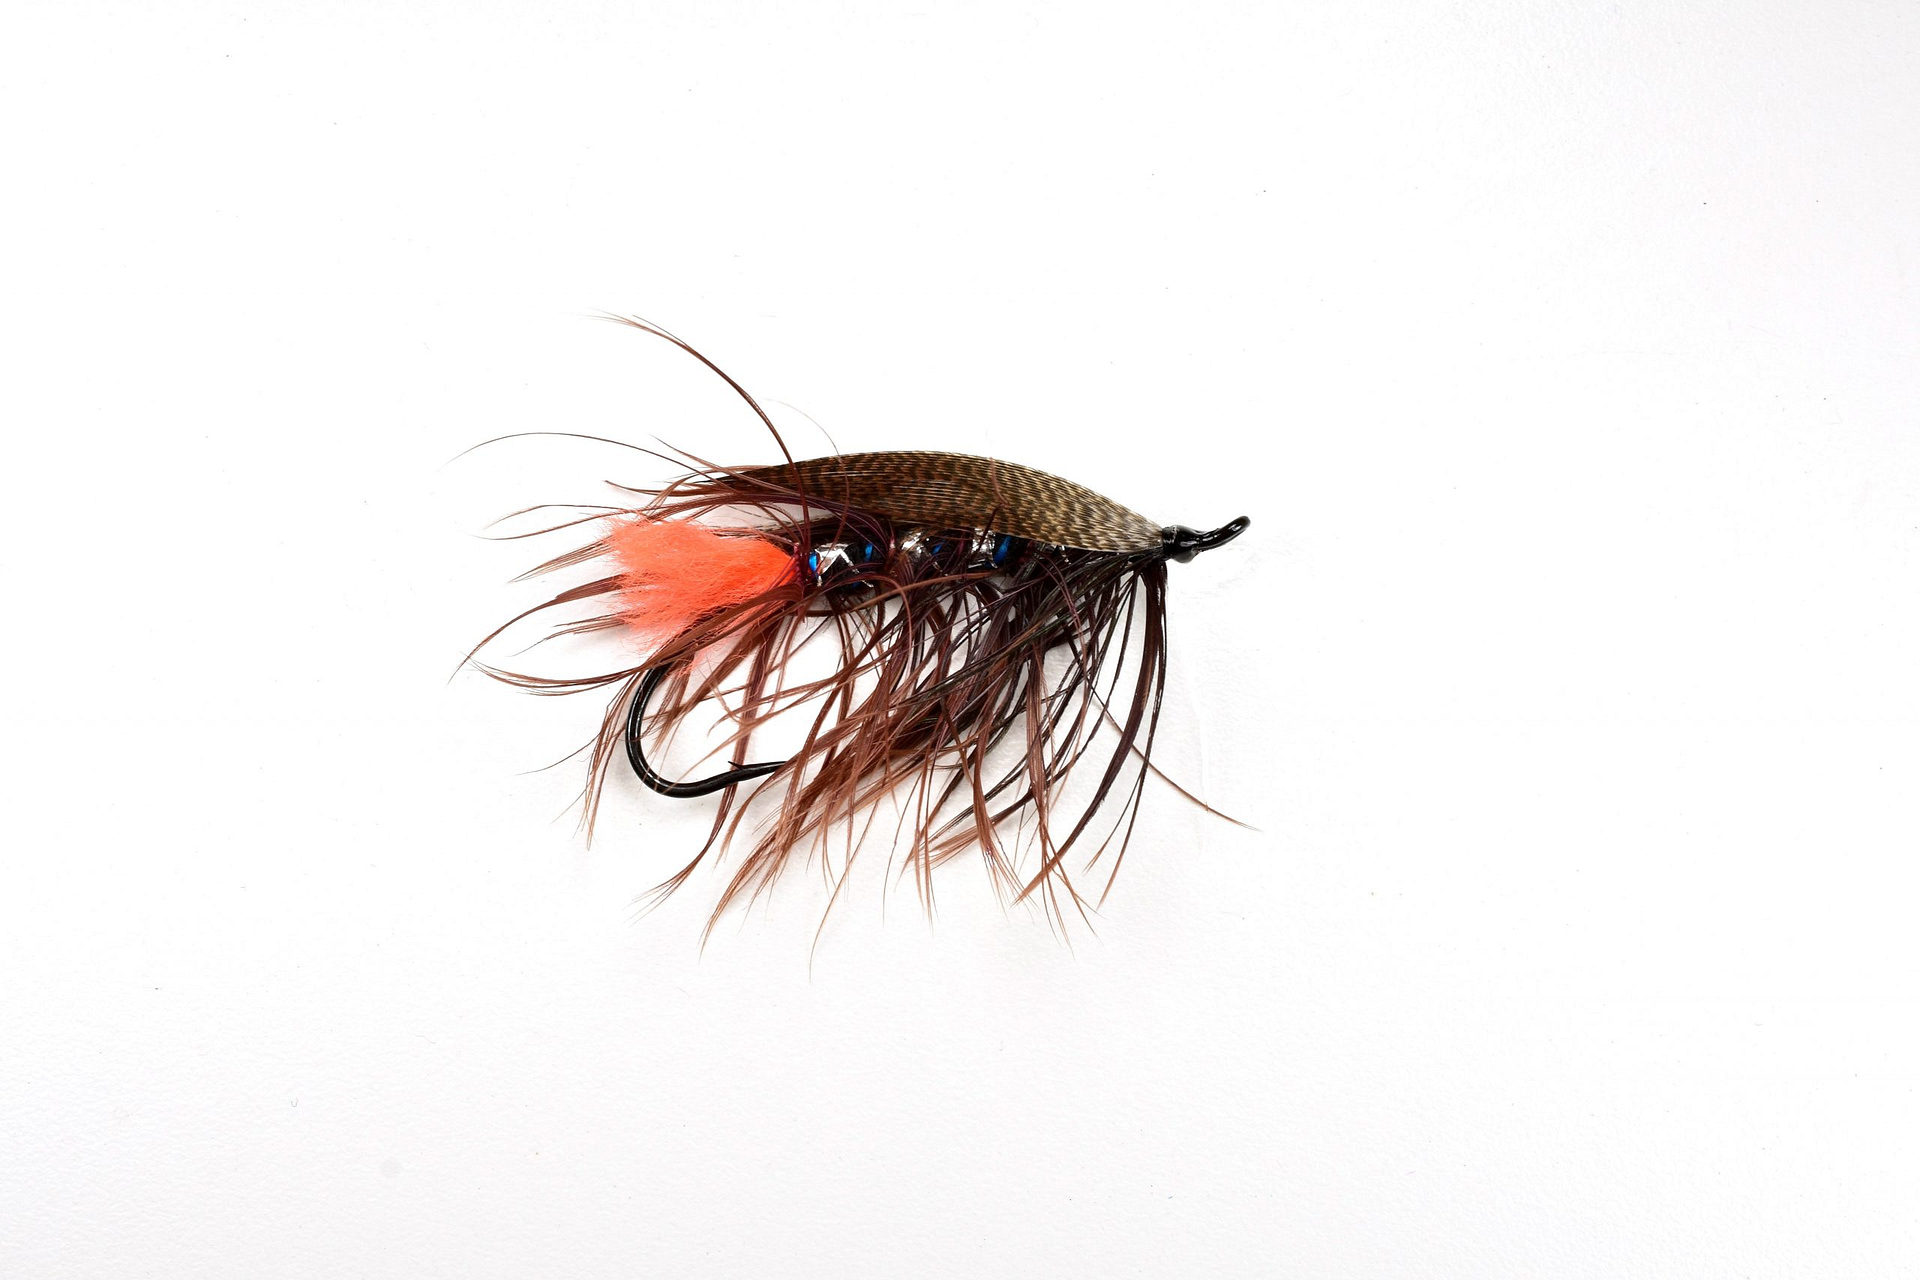 Tying Atlantic Salmon and Spey Flies, Materials-Part 2, Fly